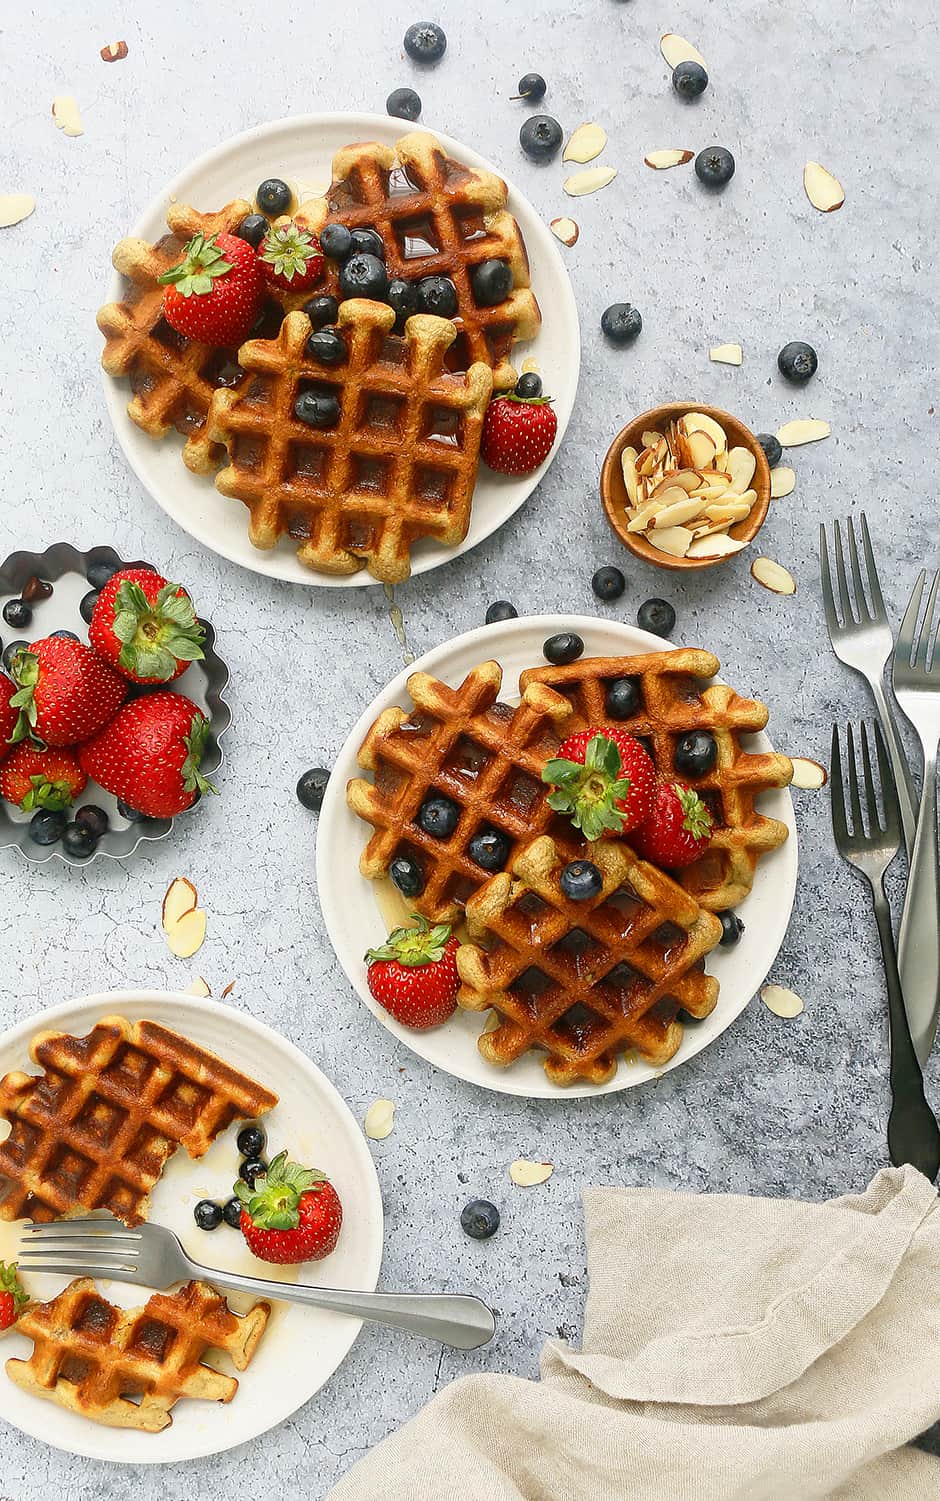 white plates with healthy homemade waffles, garnished with fresh berries and sliced almonds and stainless steel forks for eating